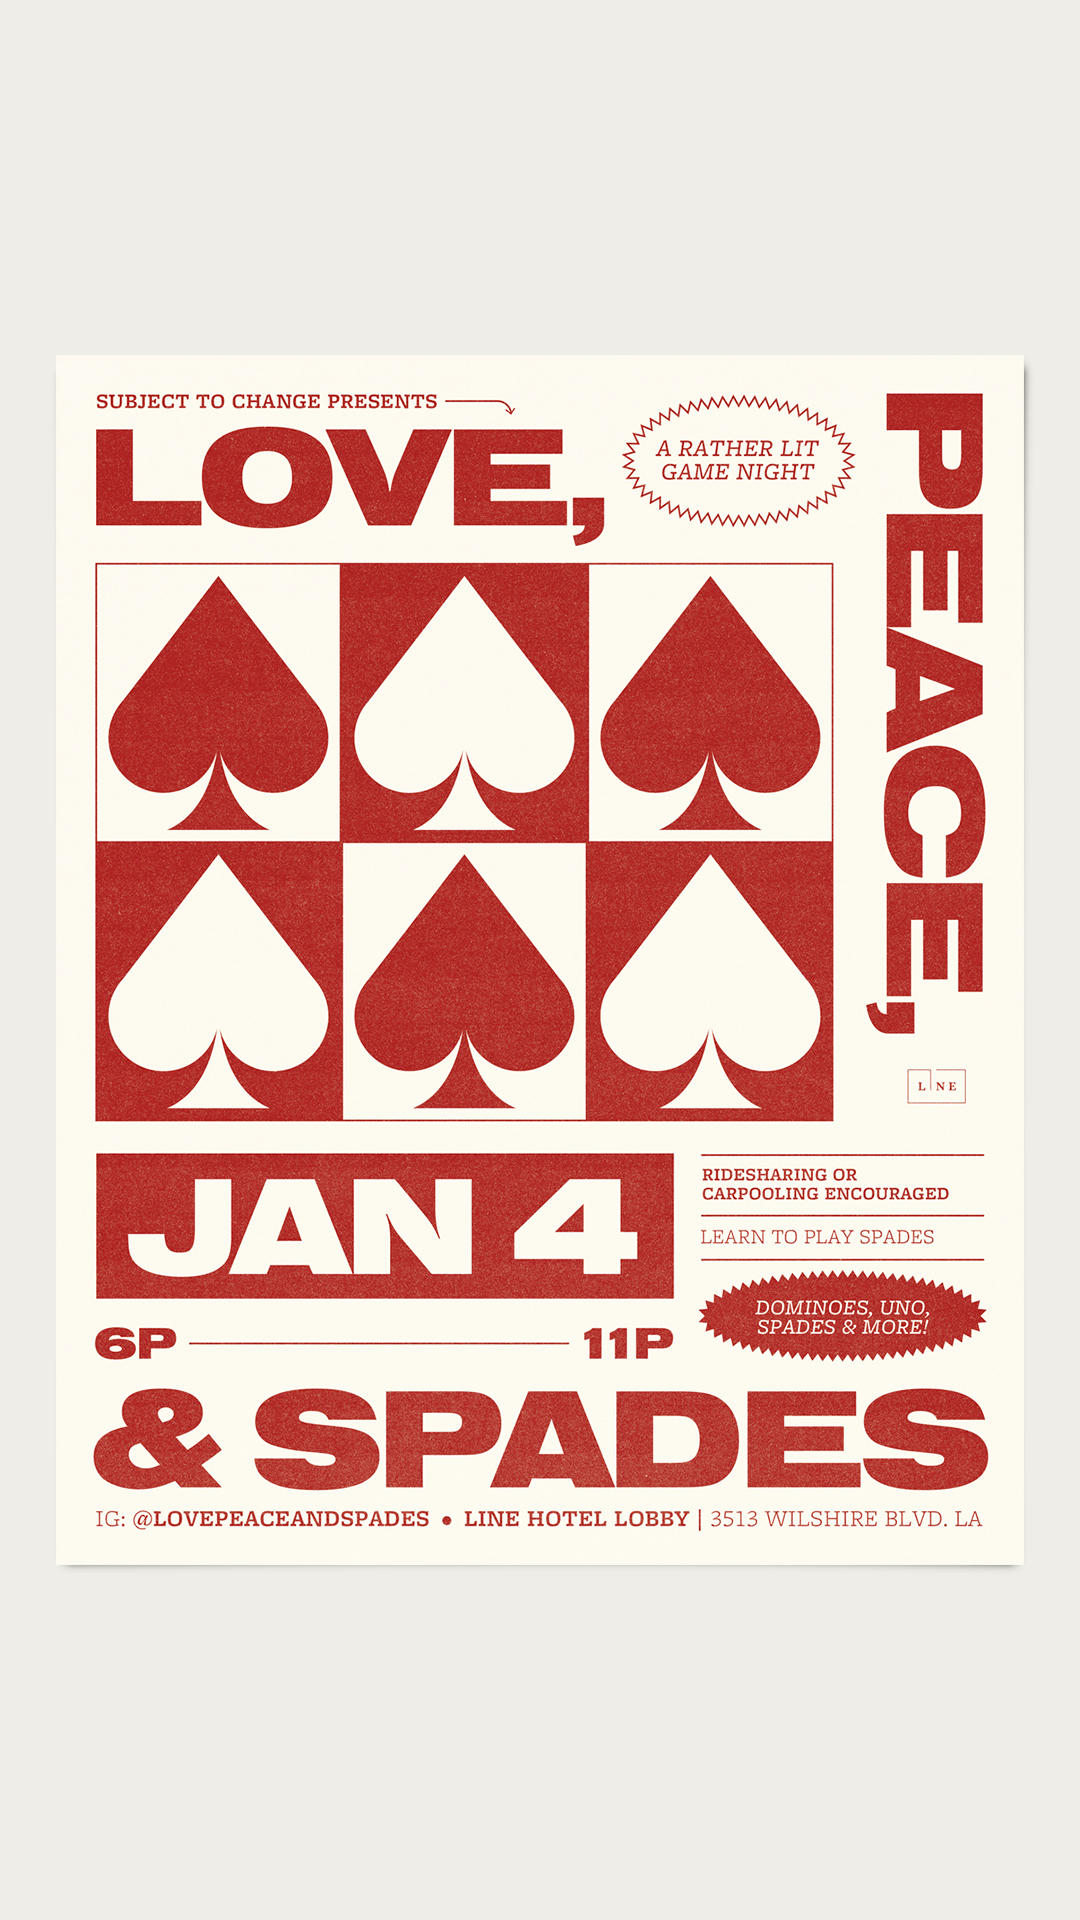 Love, Peace, & Spades - January 4th - 6pm to 11pm